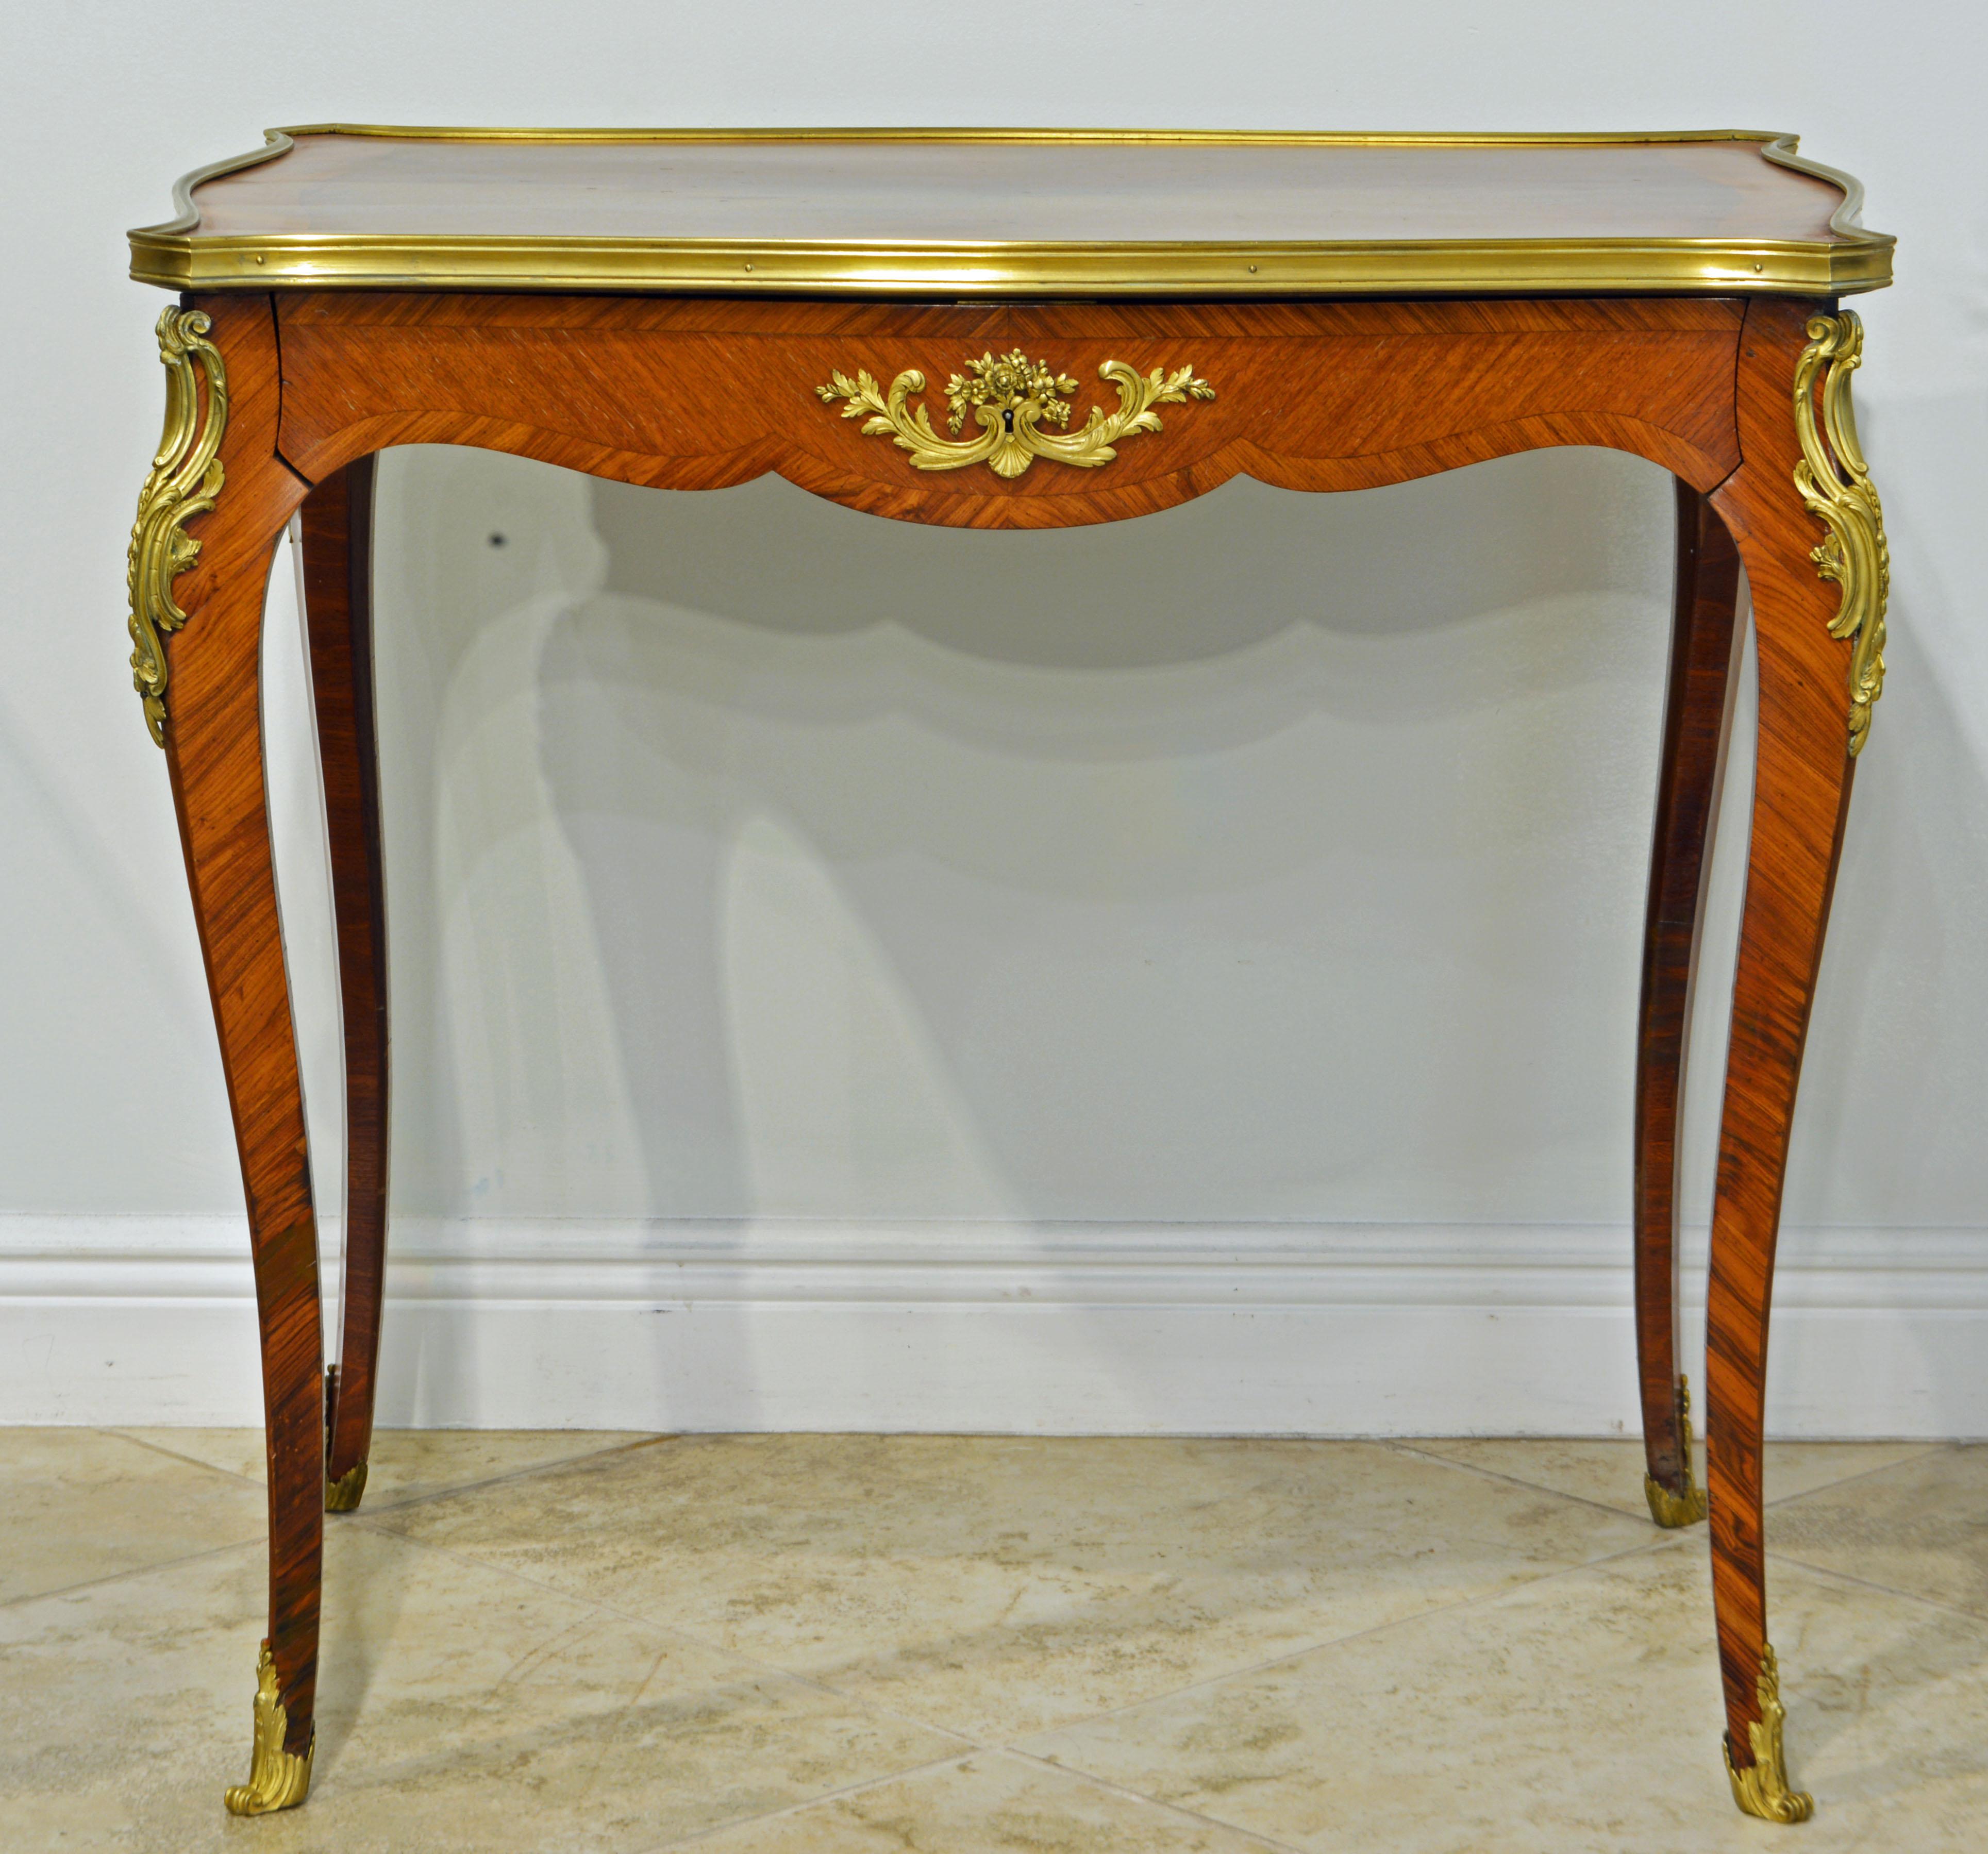 This elegant side table features a parquetry shaped top surrounded by a gilt bronze edge above shaped aprons accented by elaborate gilt bronze mounts on the corners and centered bronze mounts on all for sides. The apron offers a concealed long